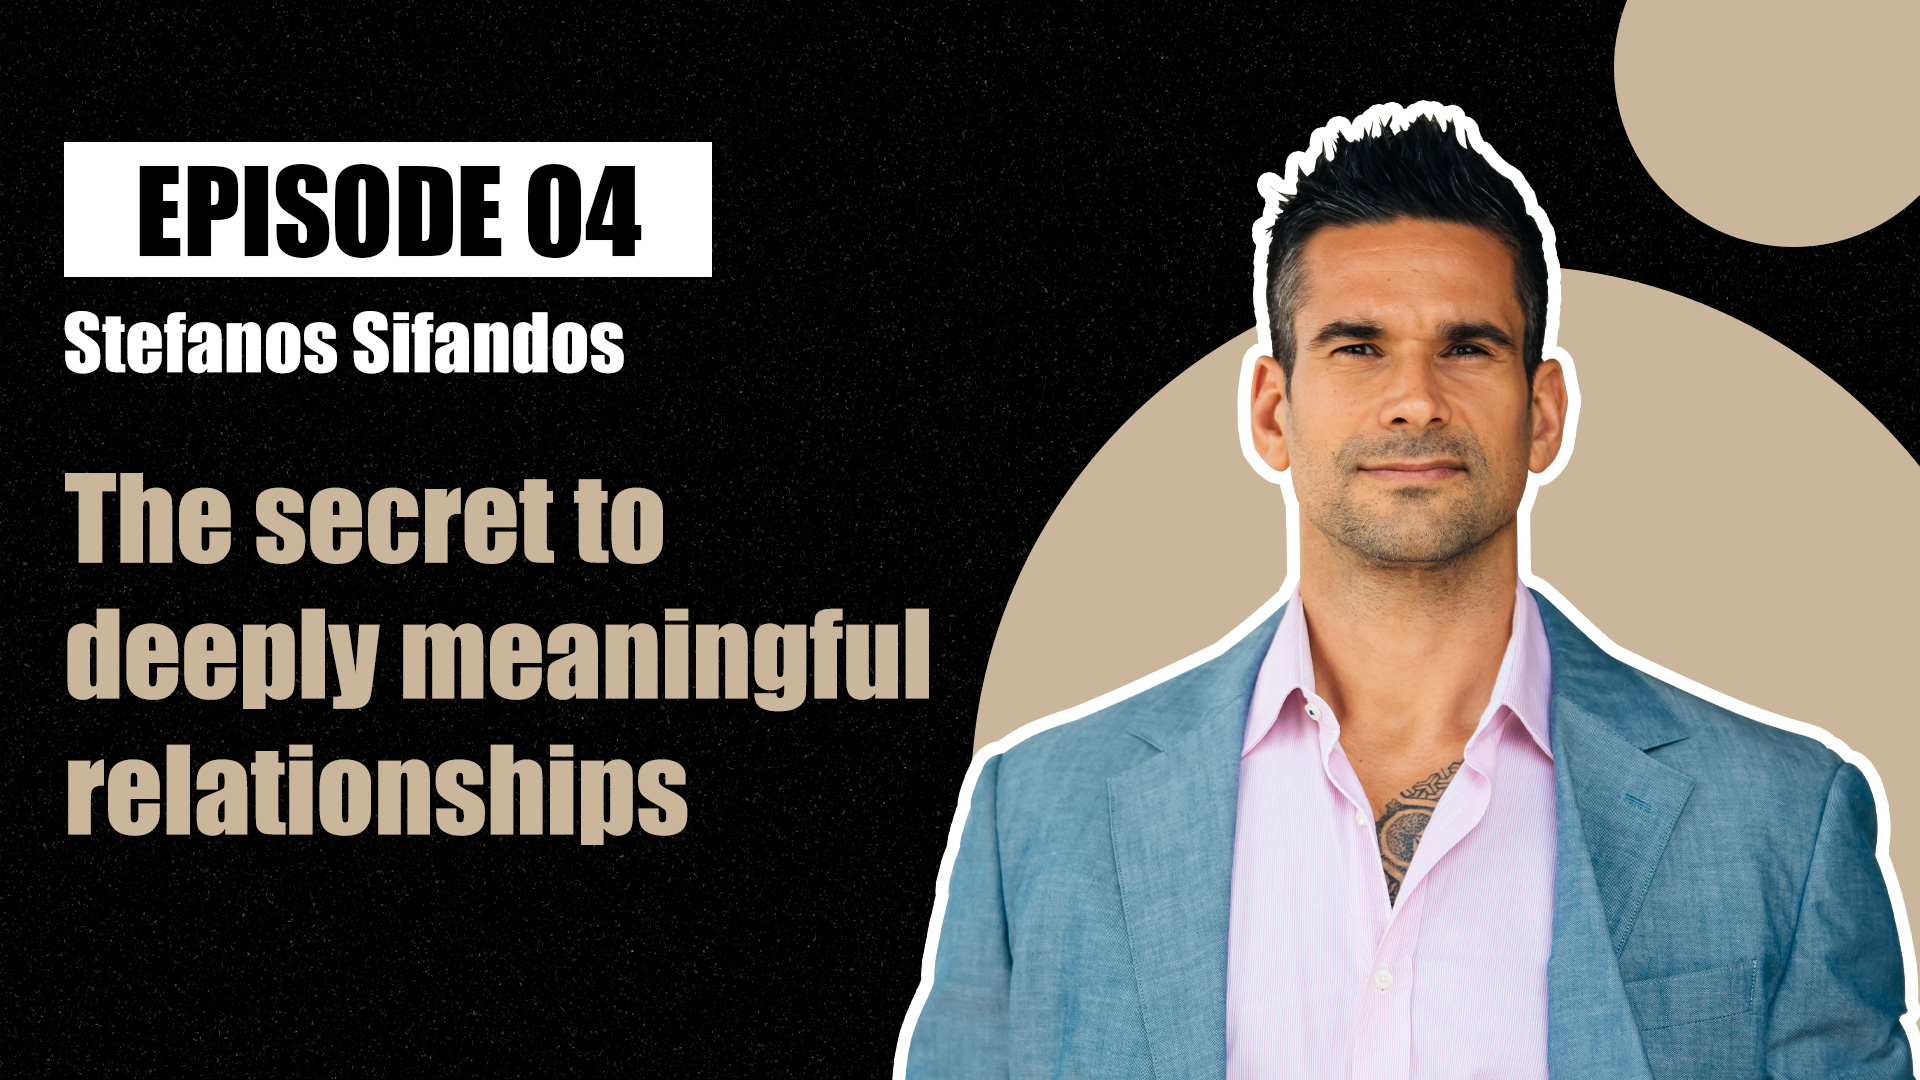 Stefanos Sifandos — The Secret To Creating Connected Relationships